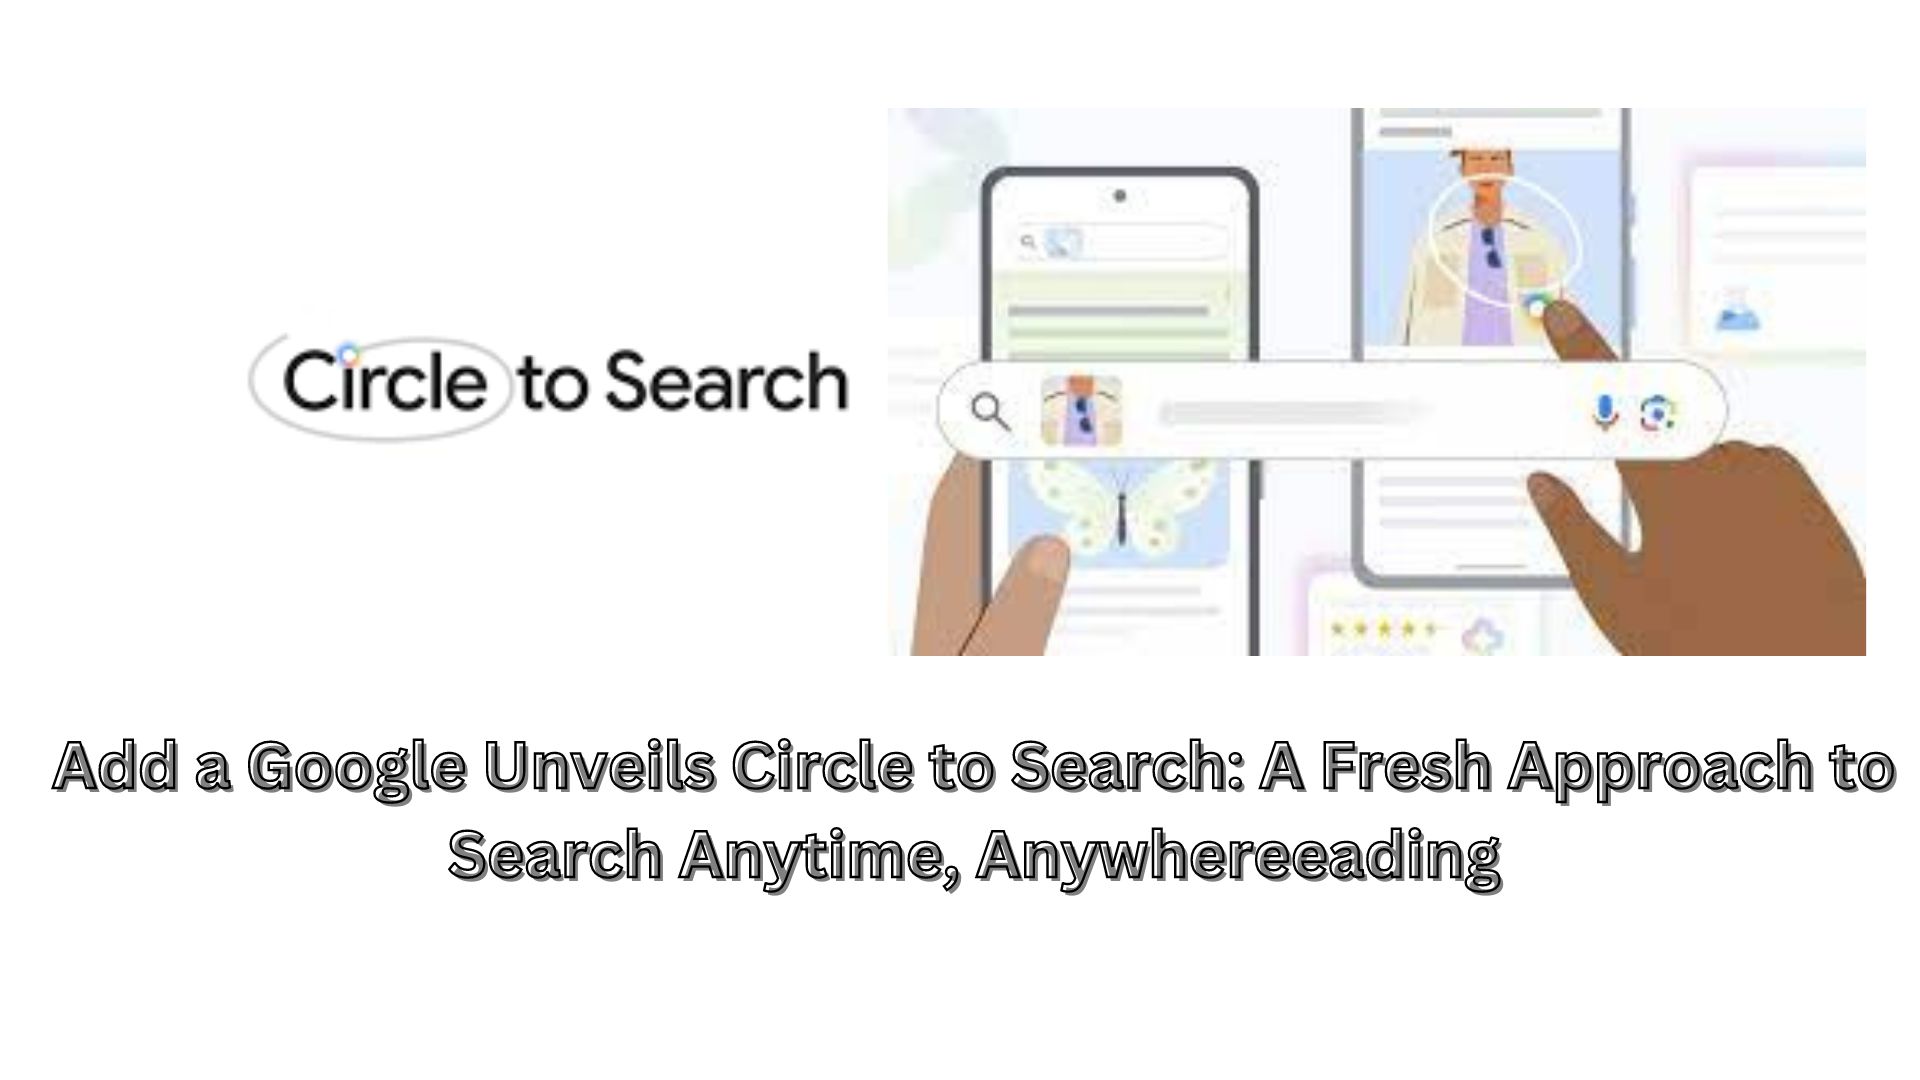 Google Unveils Circle to Search: A Fresh Approach to Search Anytime, Anywhere